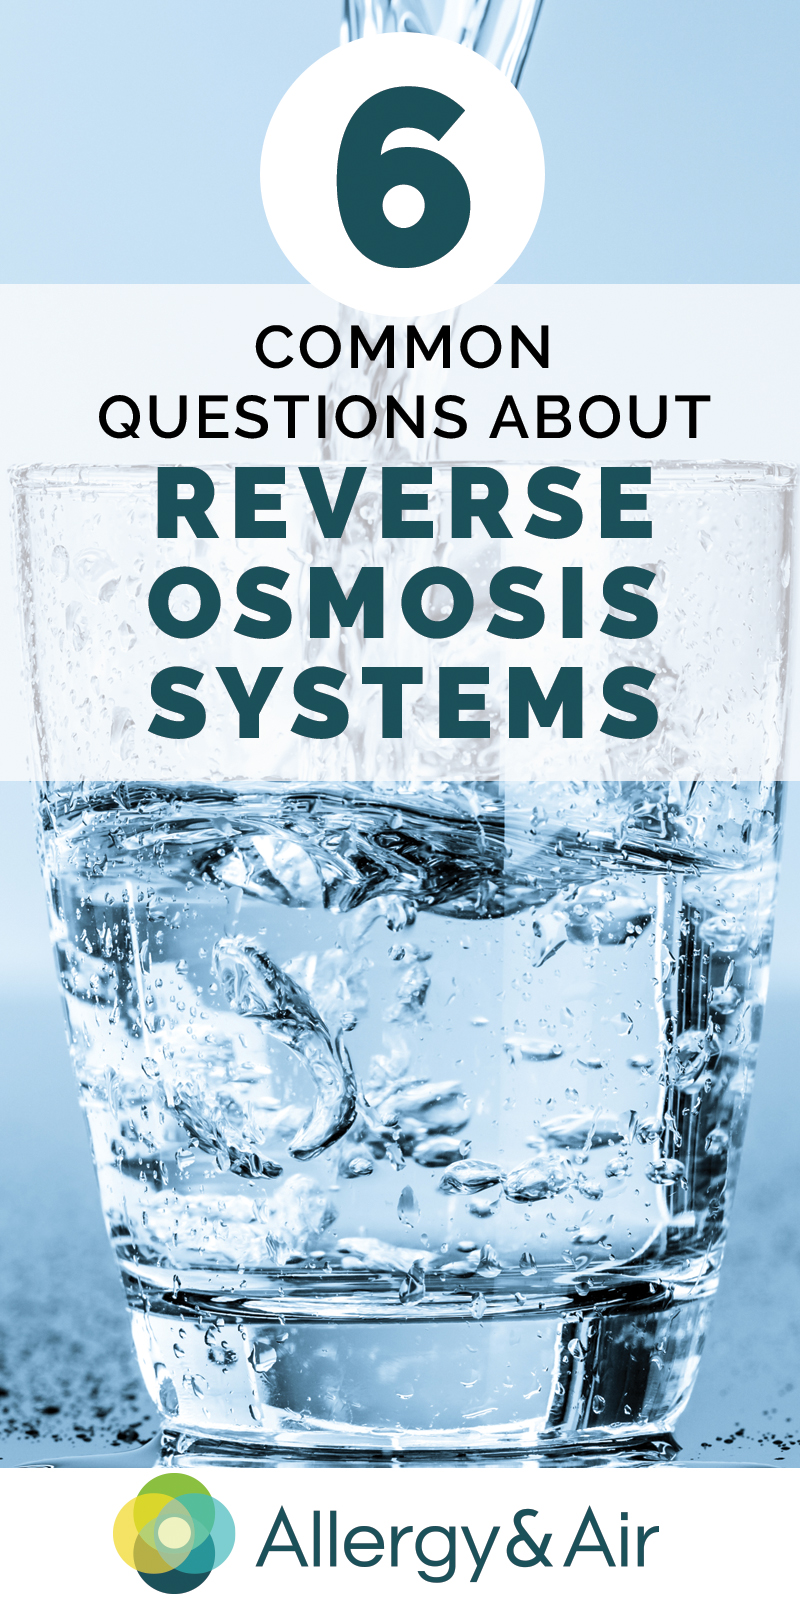 6 Common Questions About Reverse Osmosis Systems